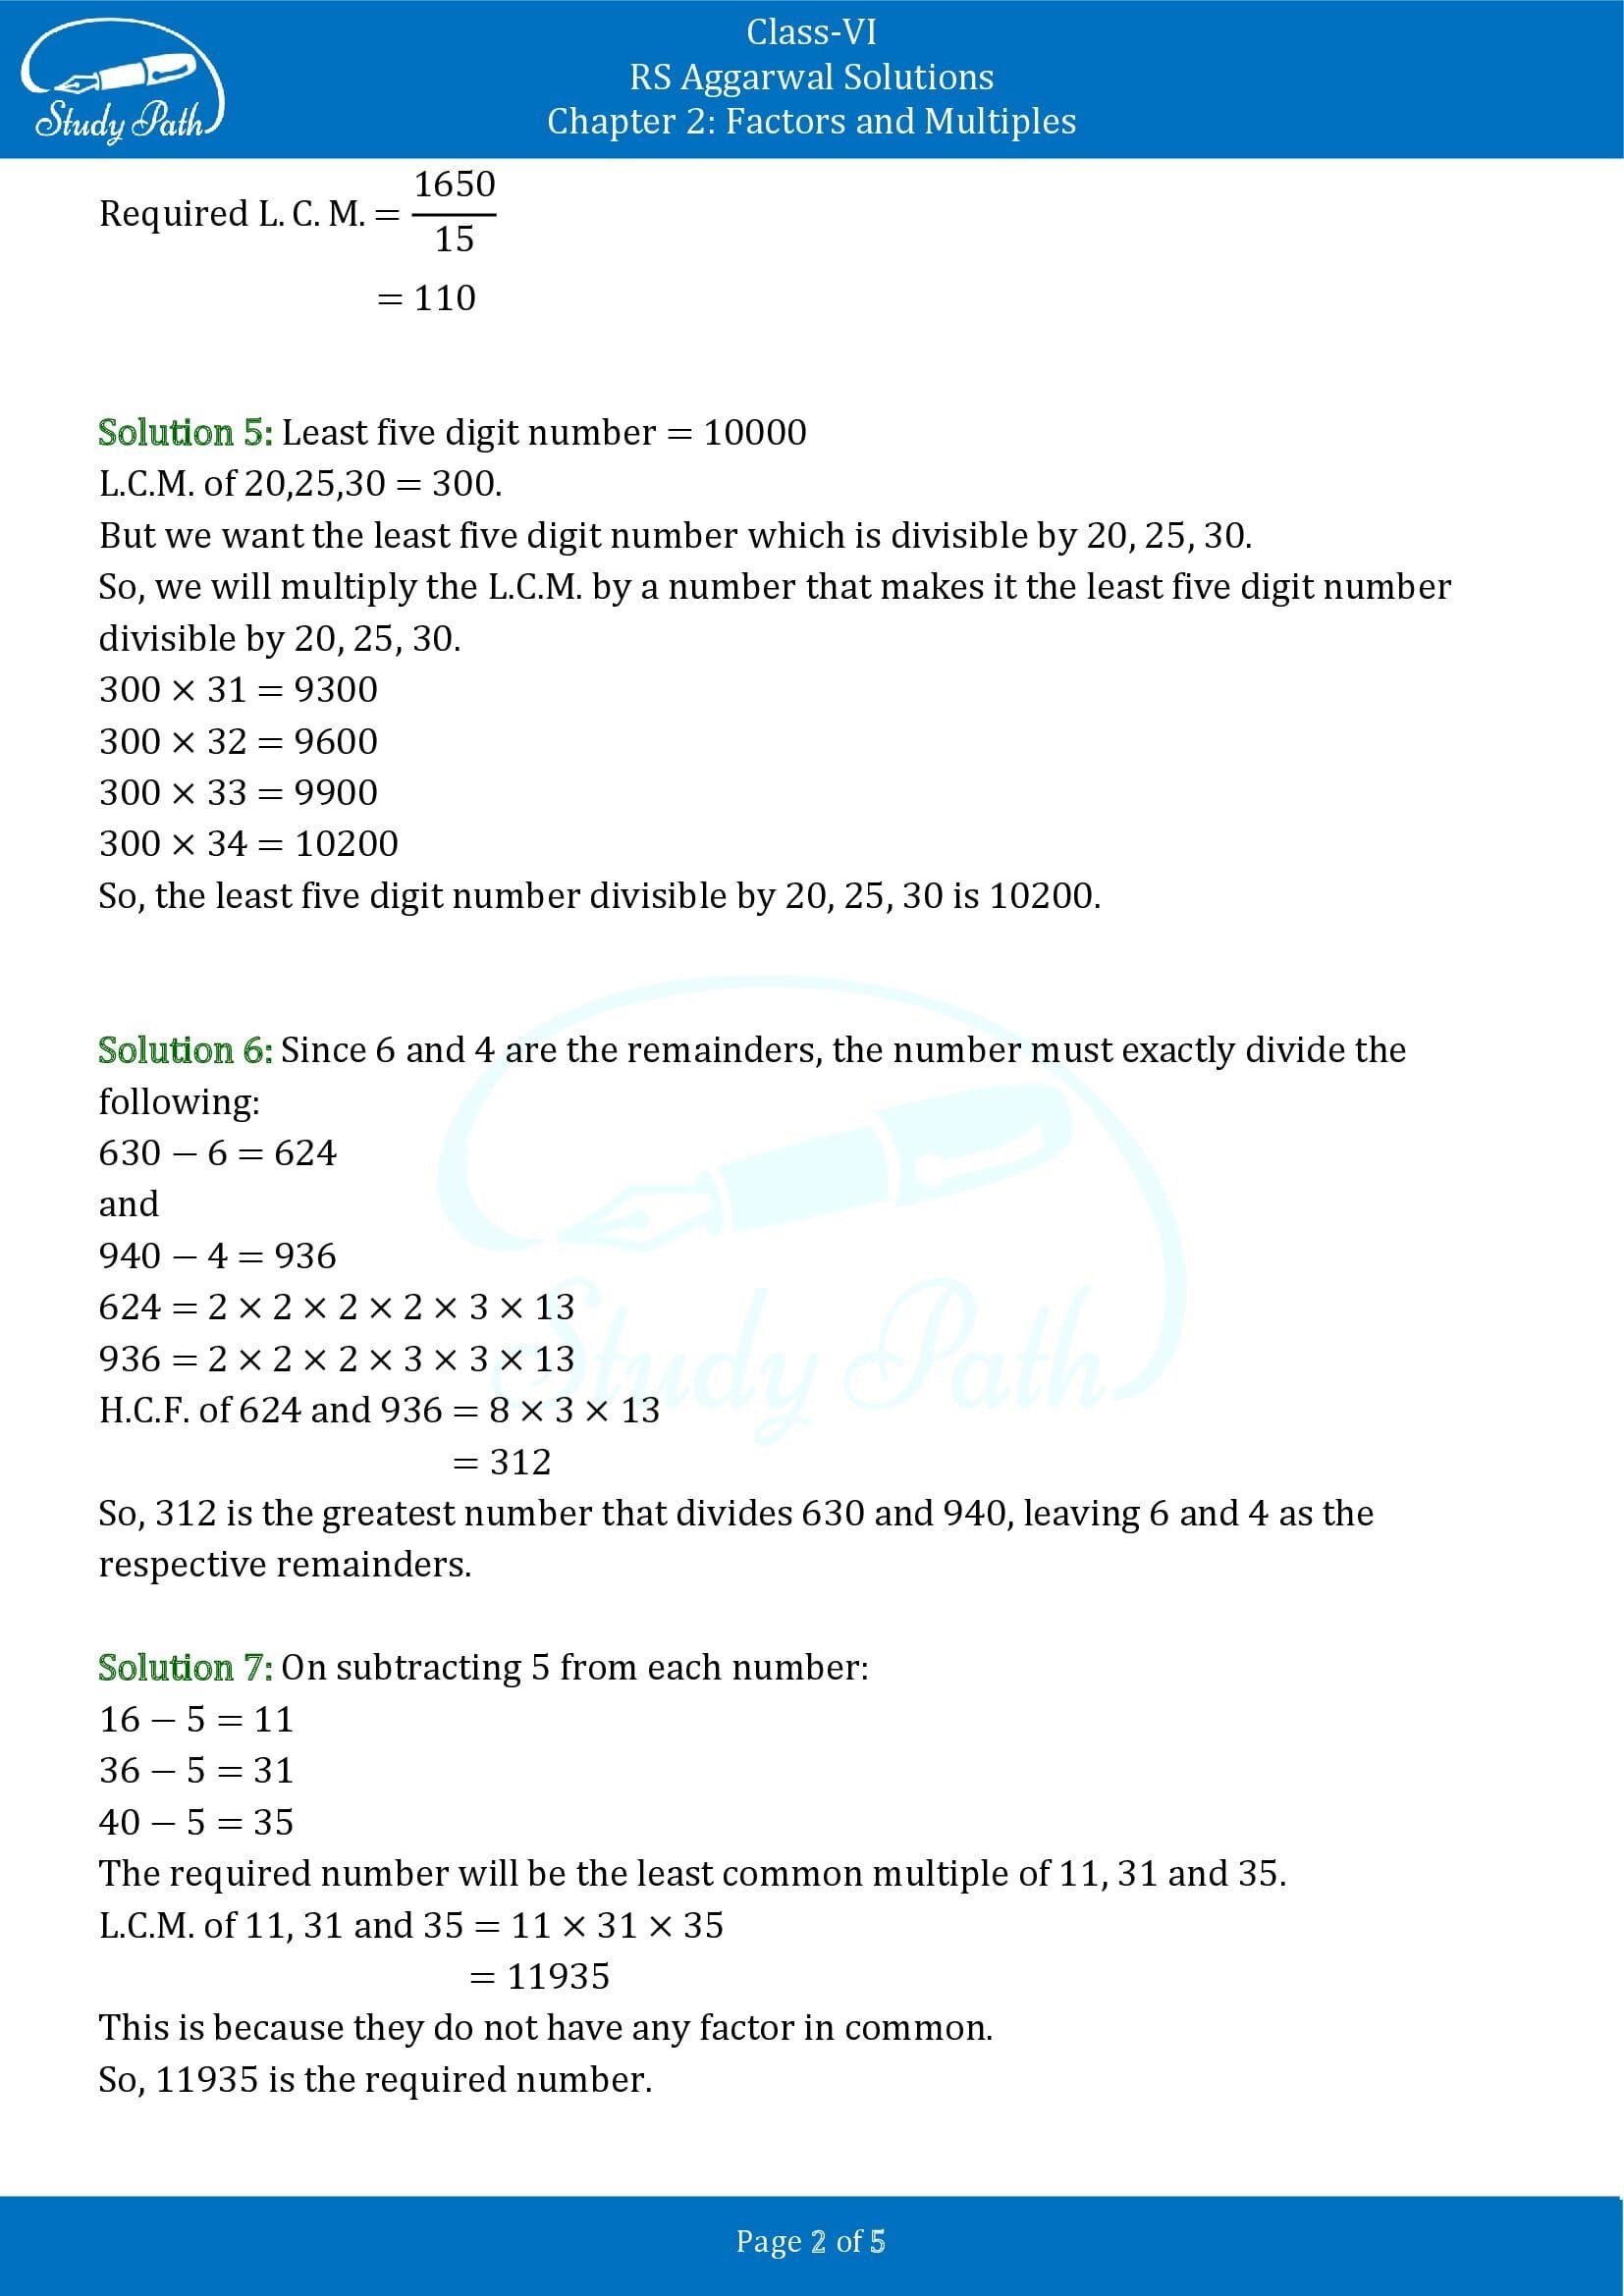 RS Aggarwal Solutions Class 6 Chapter 2 Factors and Multiples Test Paper 00002